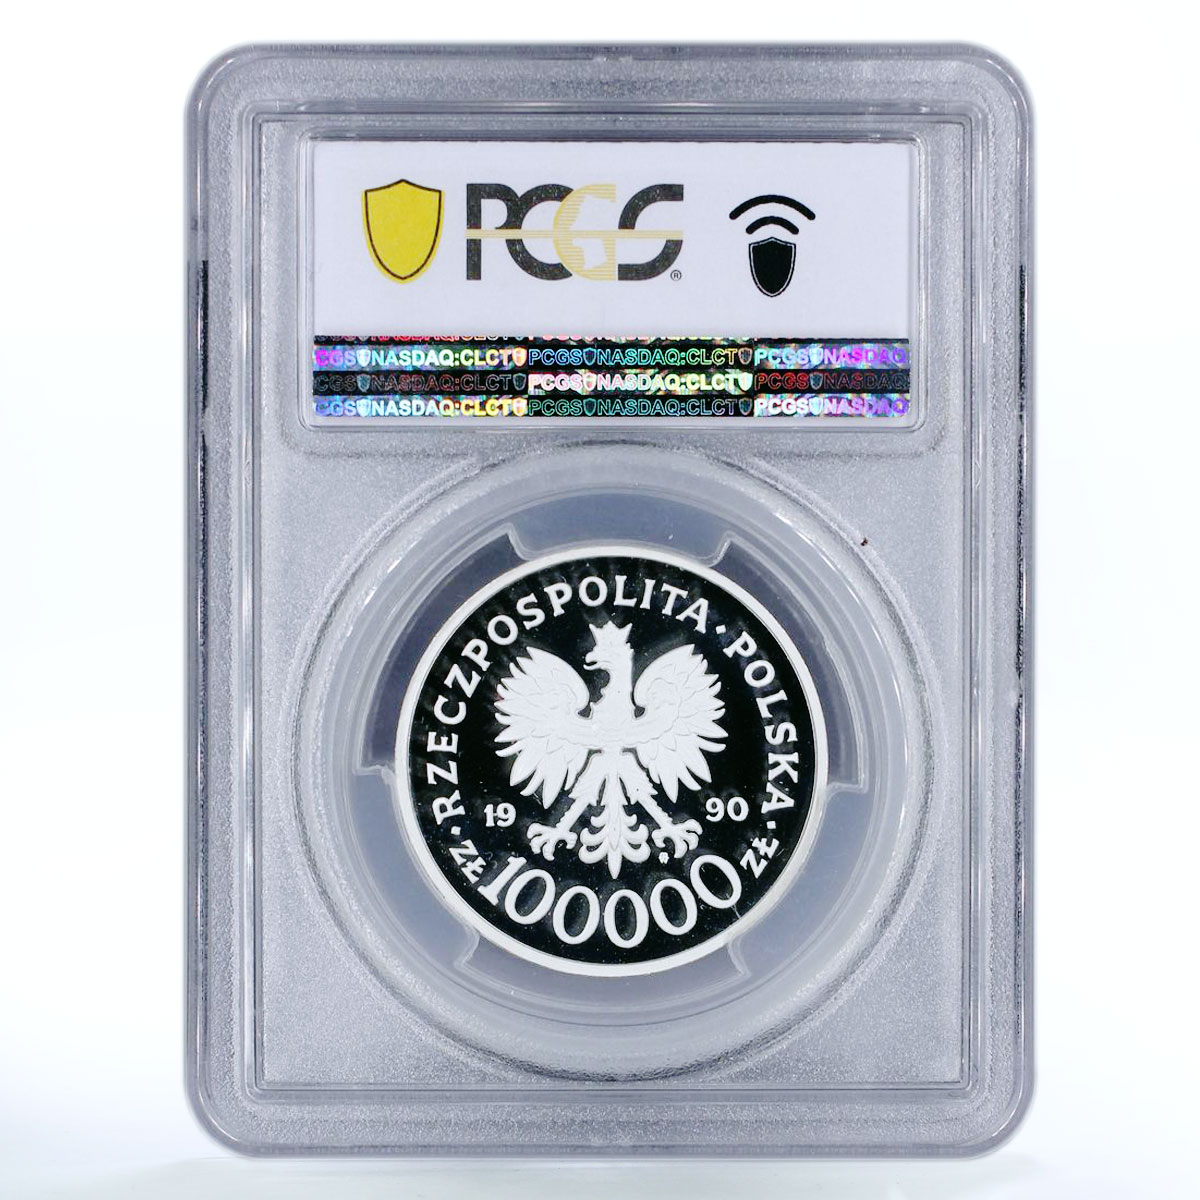 Poland 100 000 zlotych Solidarity 1980-1990 32 mm PR69 PCGS silver coin 1990